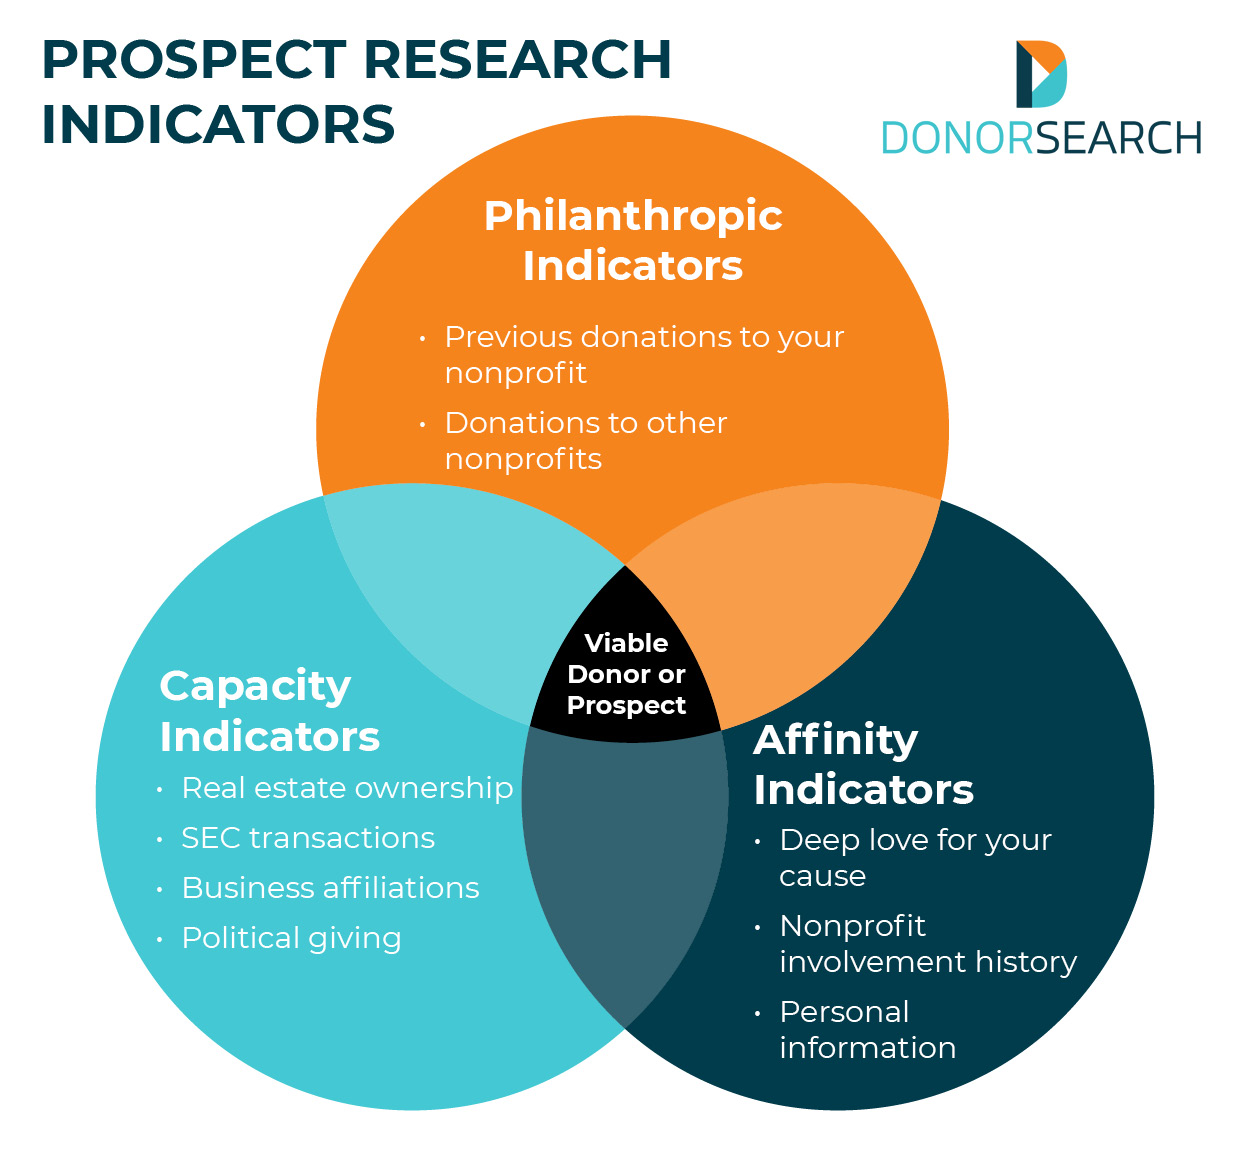 A Venn diagram comparing the three different types of prospect research markers, all of which are discussed below.